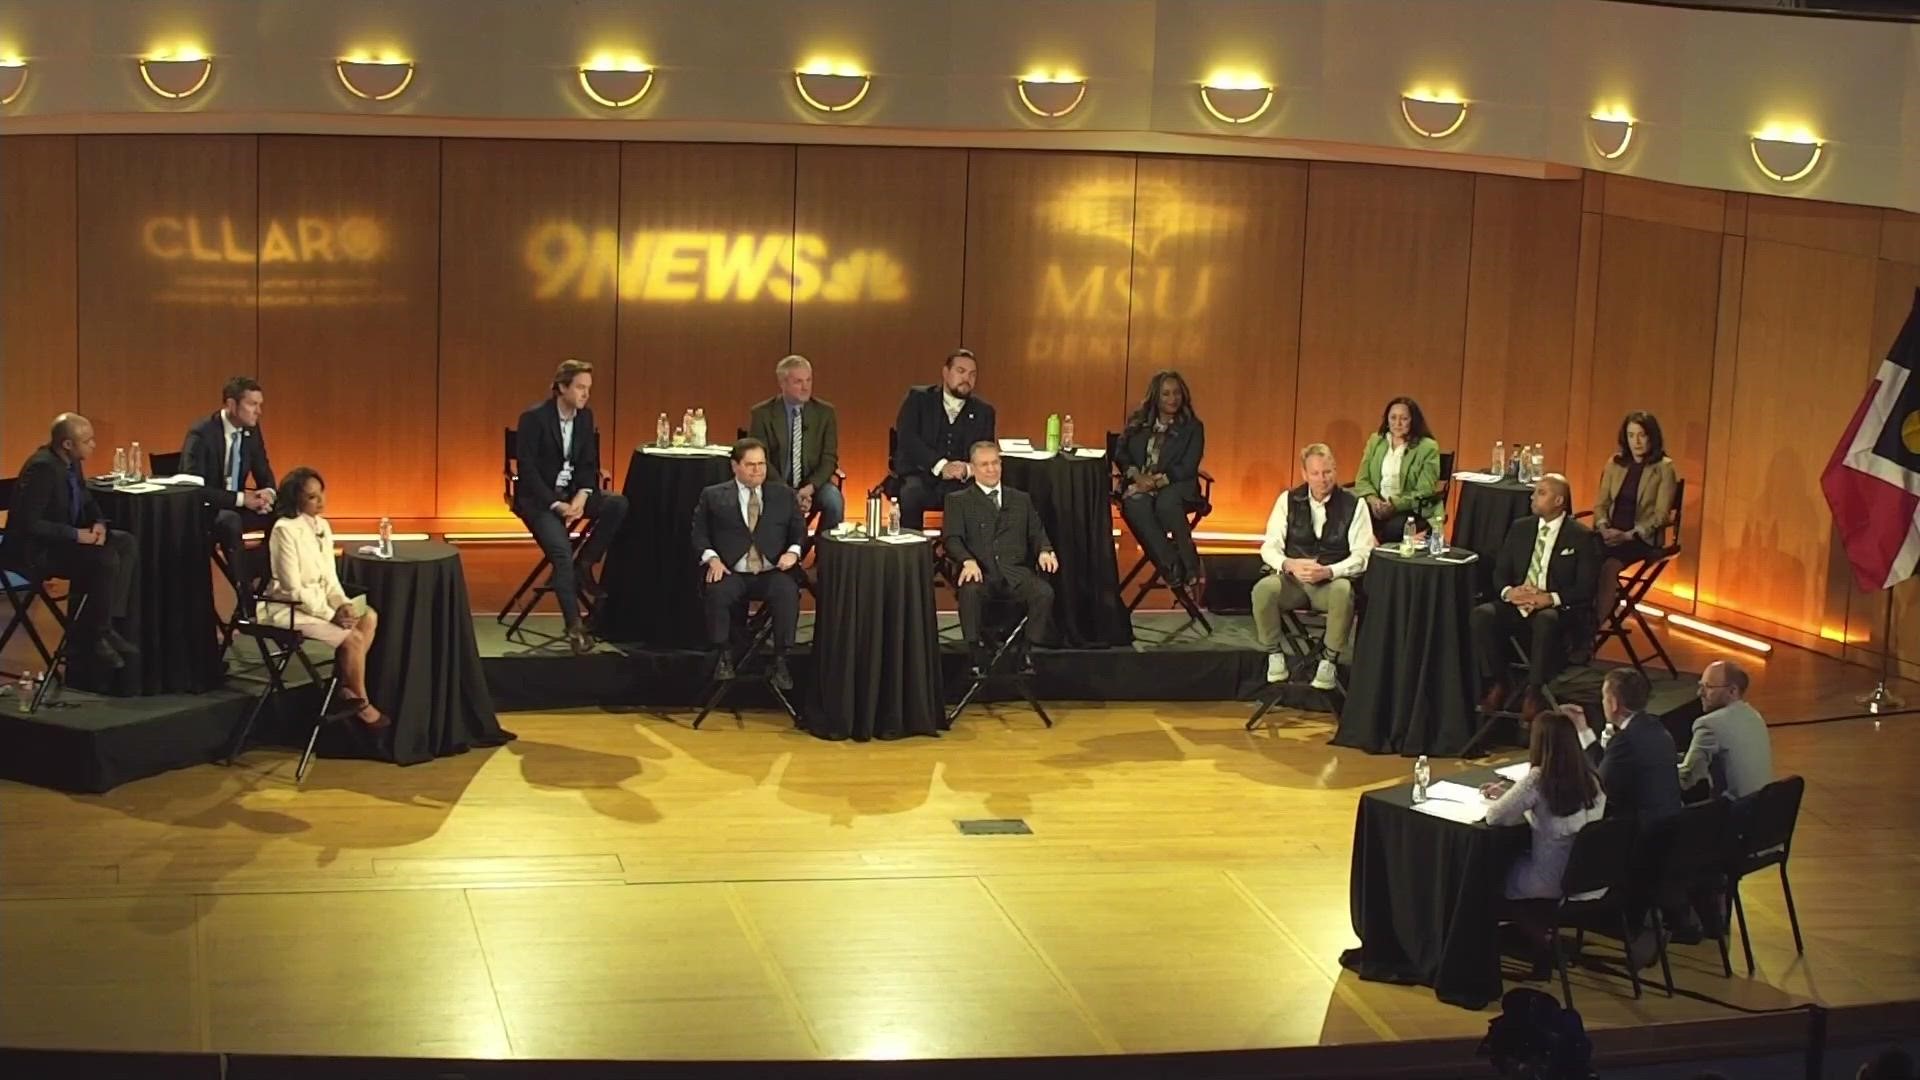 This is the first of three 9NEWS debates in the race for Denver Mayor, featuring the 13 candidates participating in Denver's Fair Elections Fund.